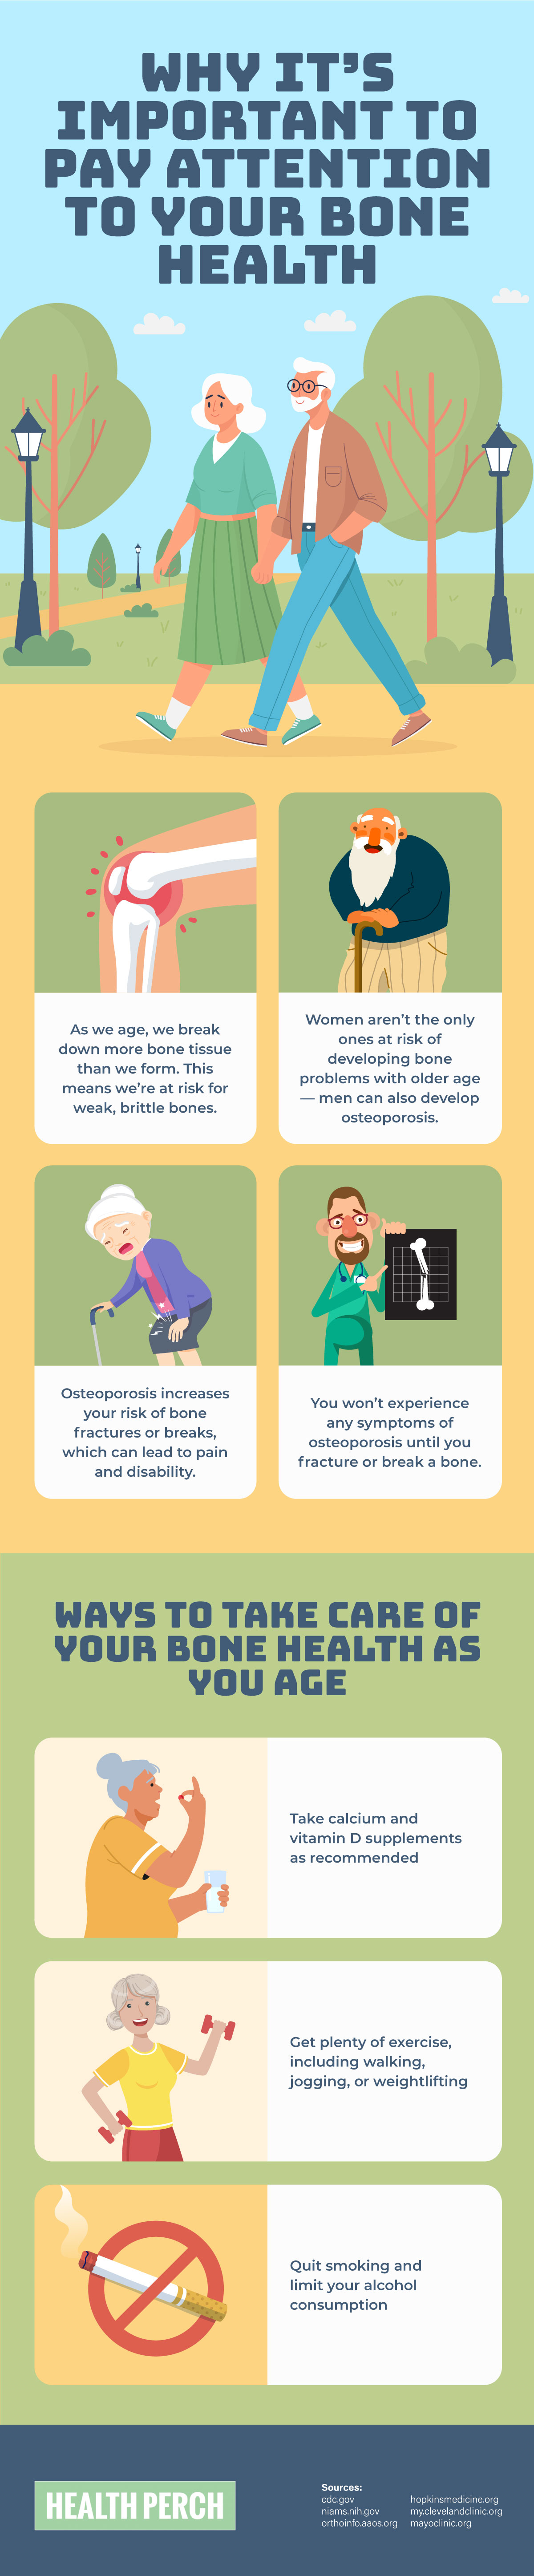 Pay Attention to Bone Health as You Get Older Infographic